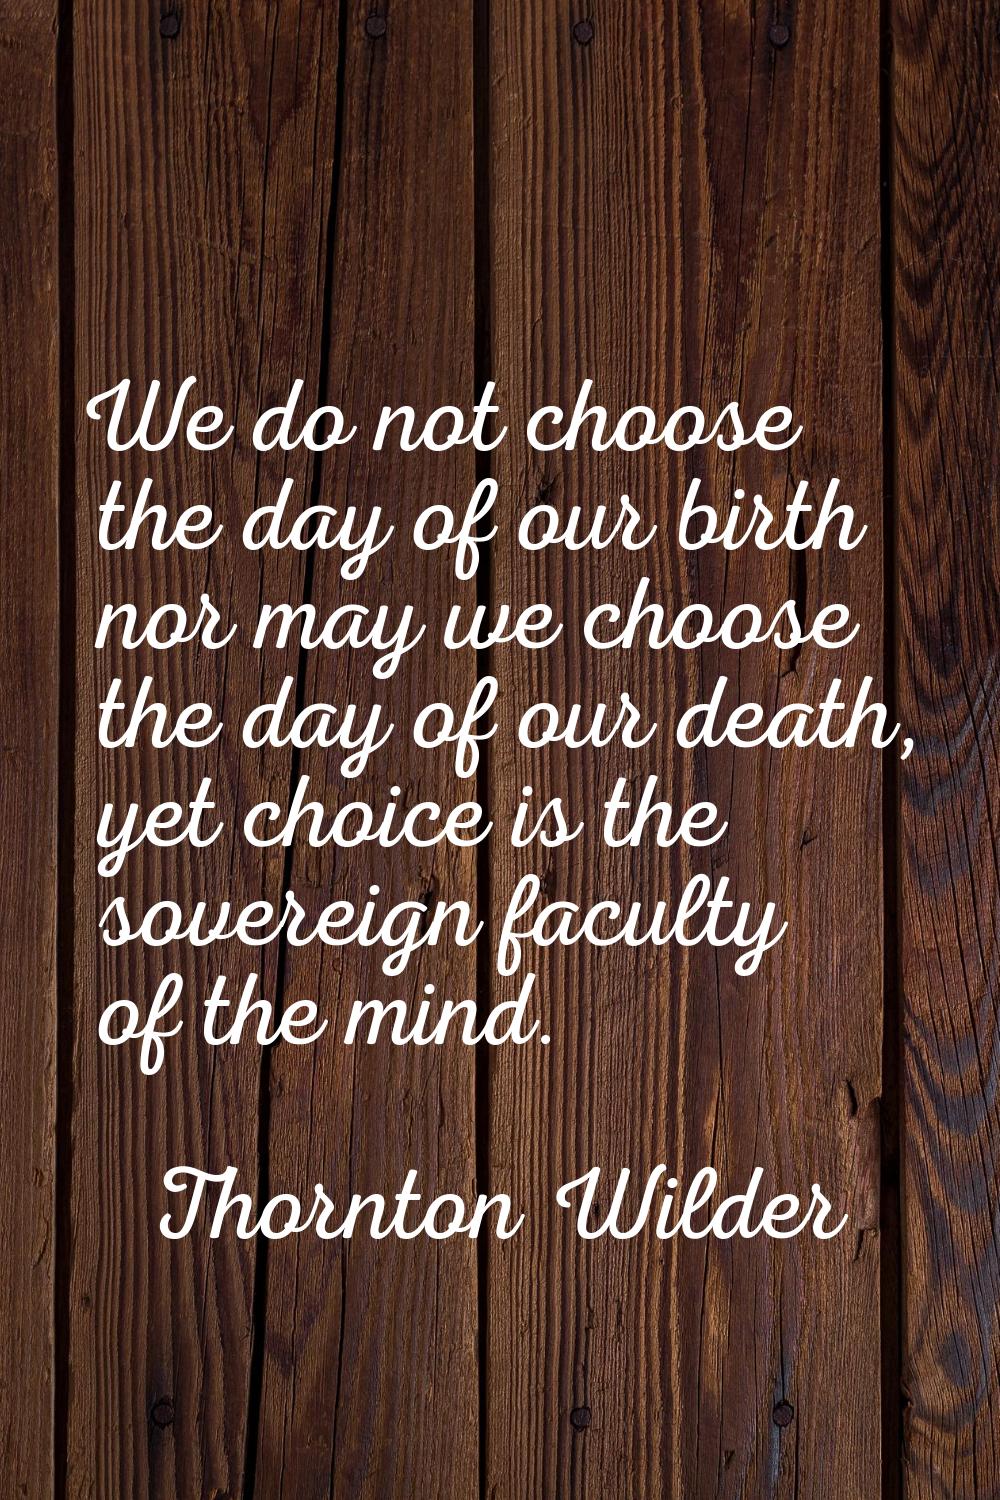 We do not choose the day of our birth nor may we choose the day of our death, yet choice is the sov